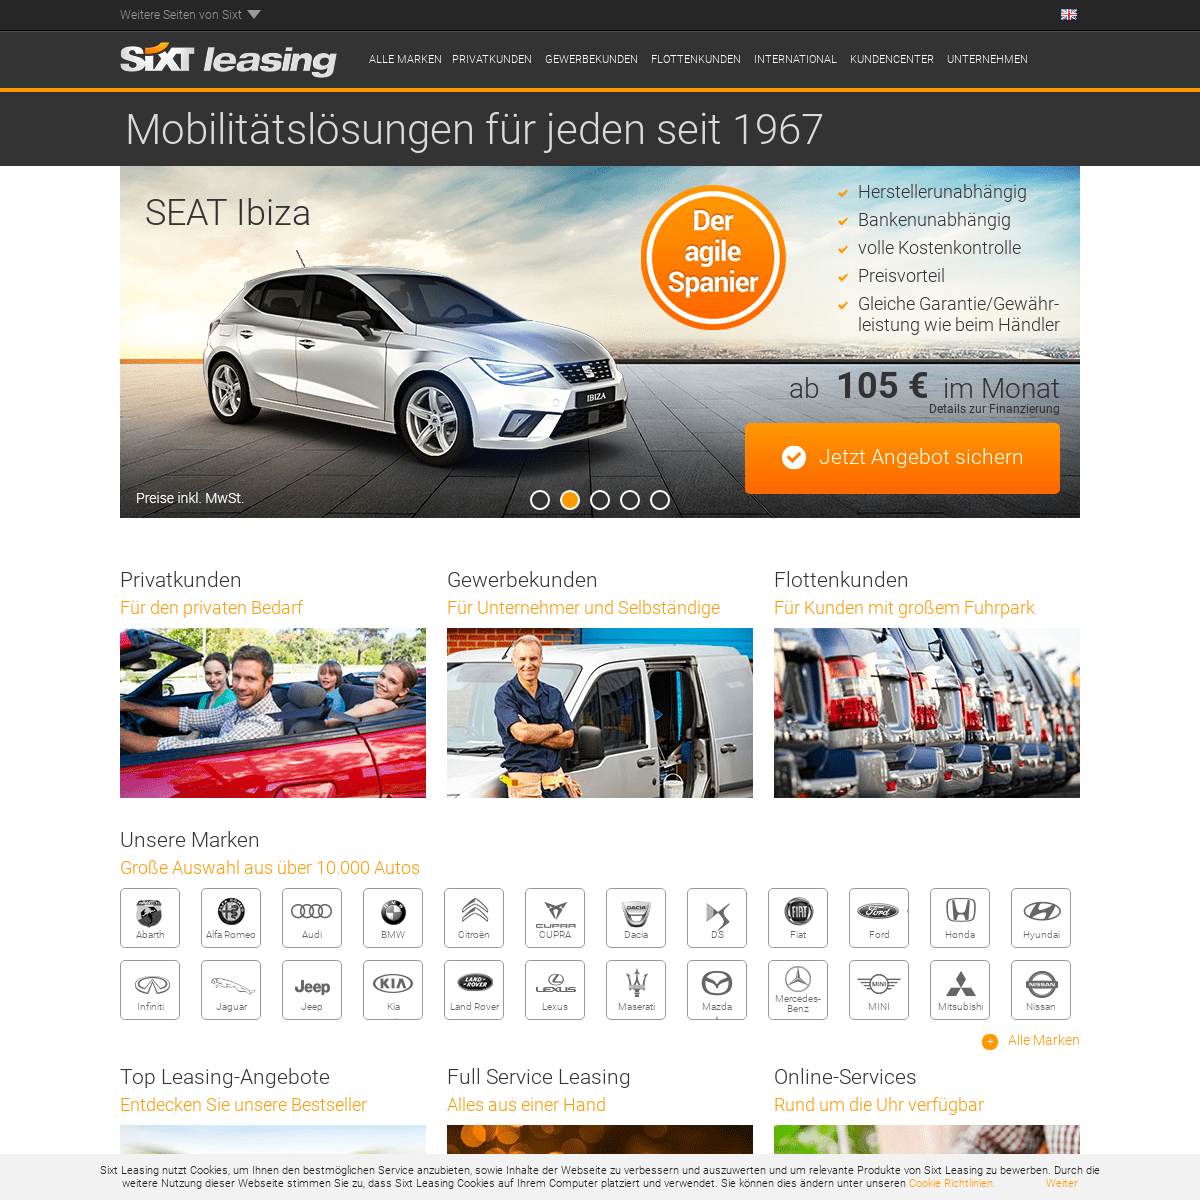 A complete backup of sixt-leasing.de